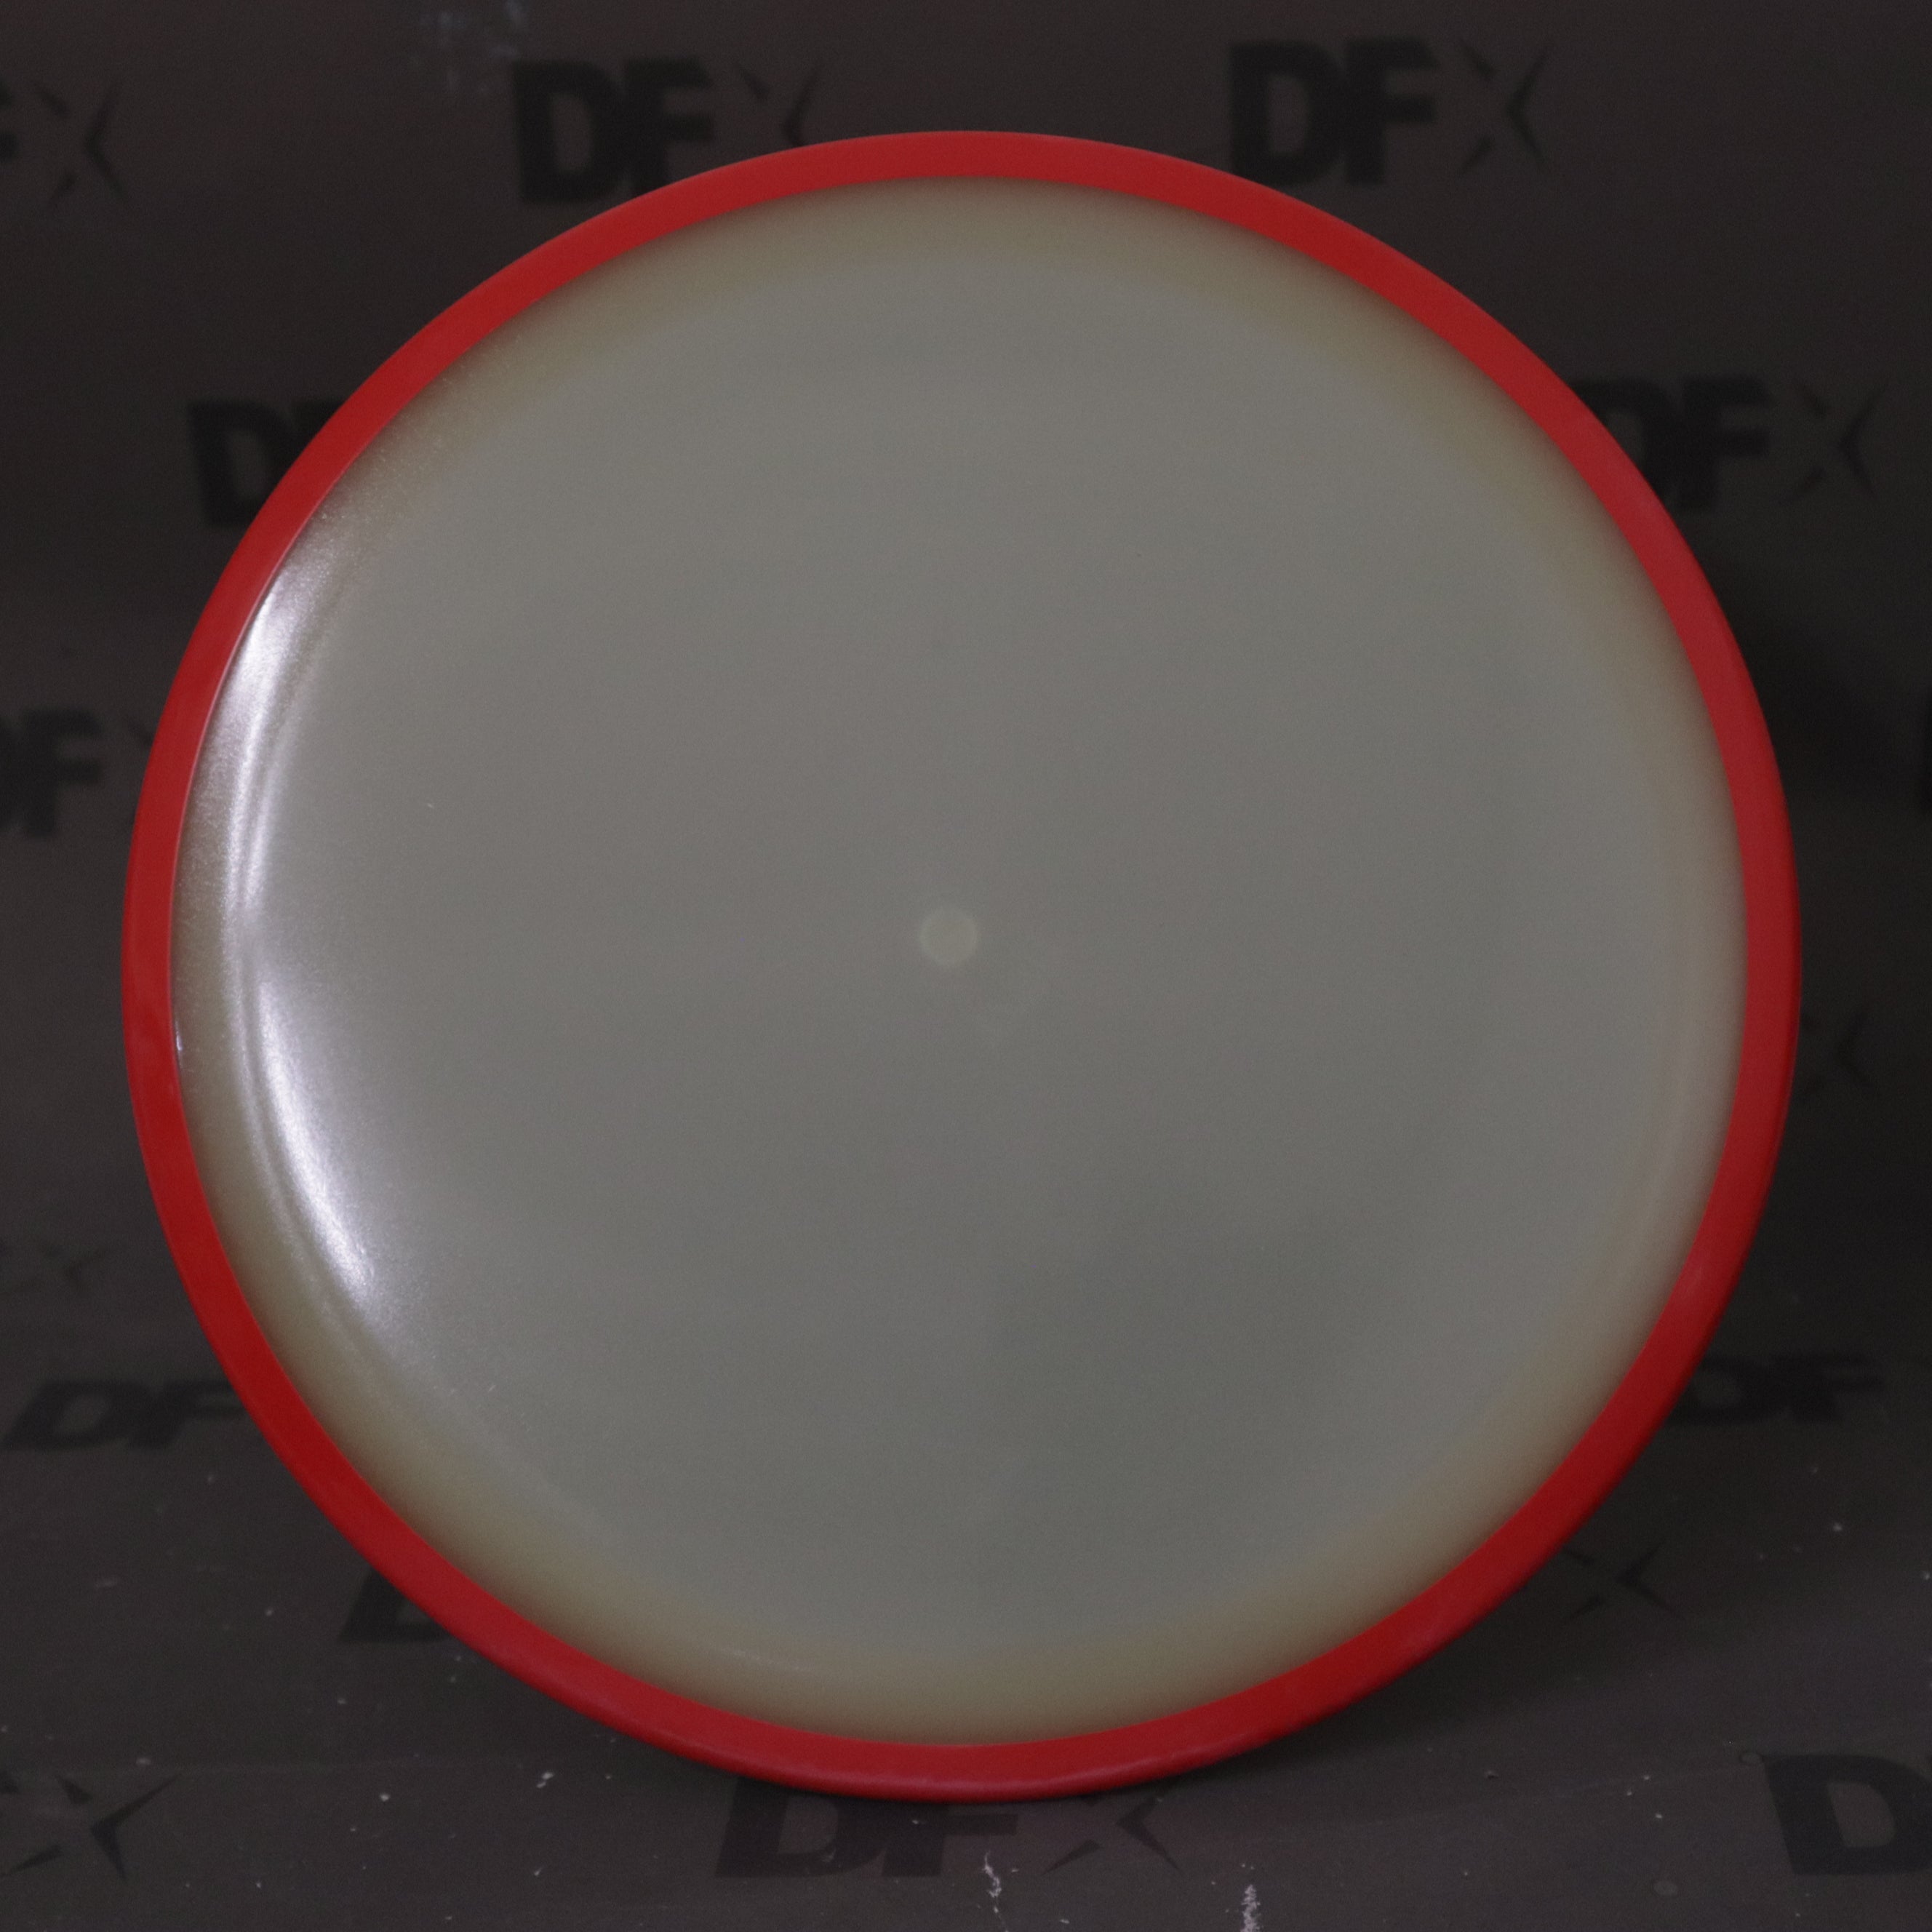 Axiom Eclipse Crave - Blank I